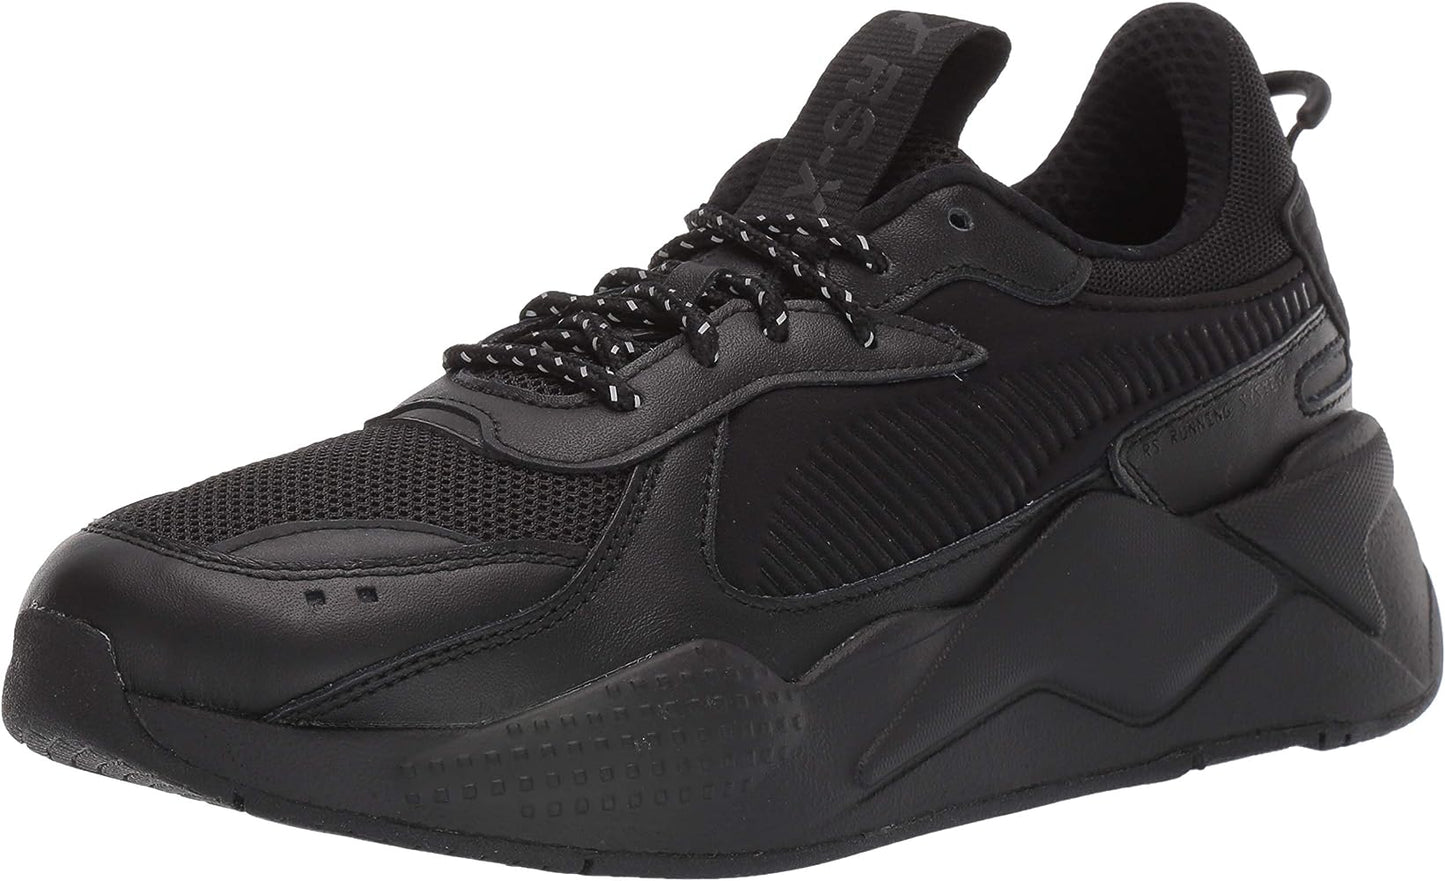 MUP Black Colour Sports Sneakers Running Shoes 369583